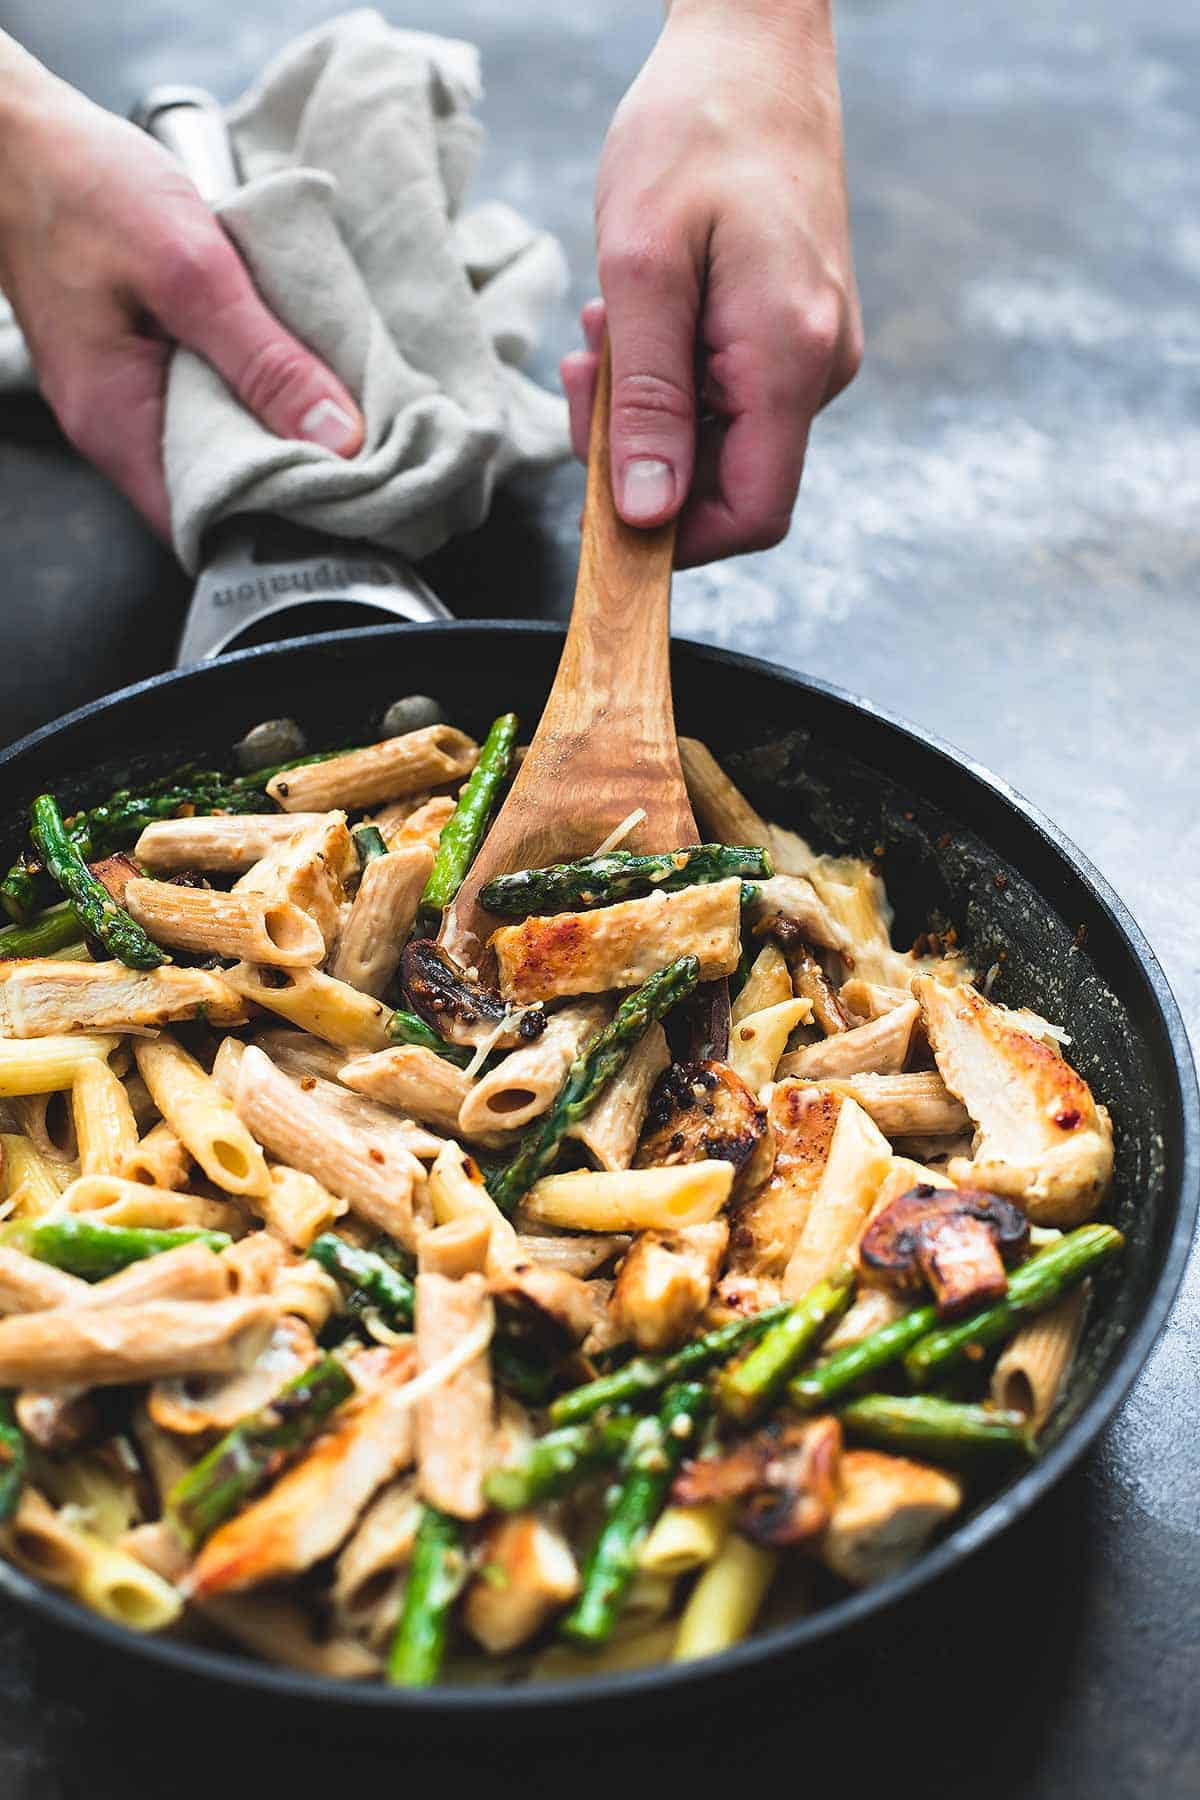 a hand scopping some garlic chicken mushroom and asparagus penne from a skillet with a wooden spoon.